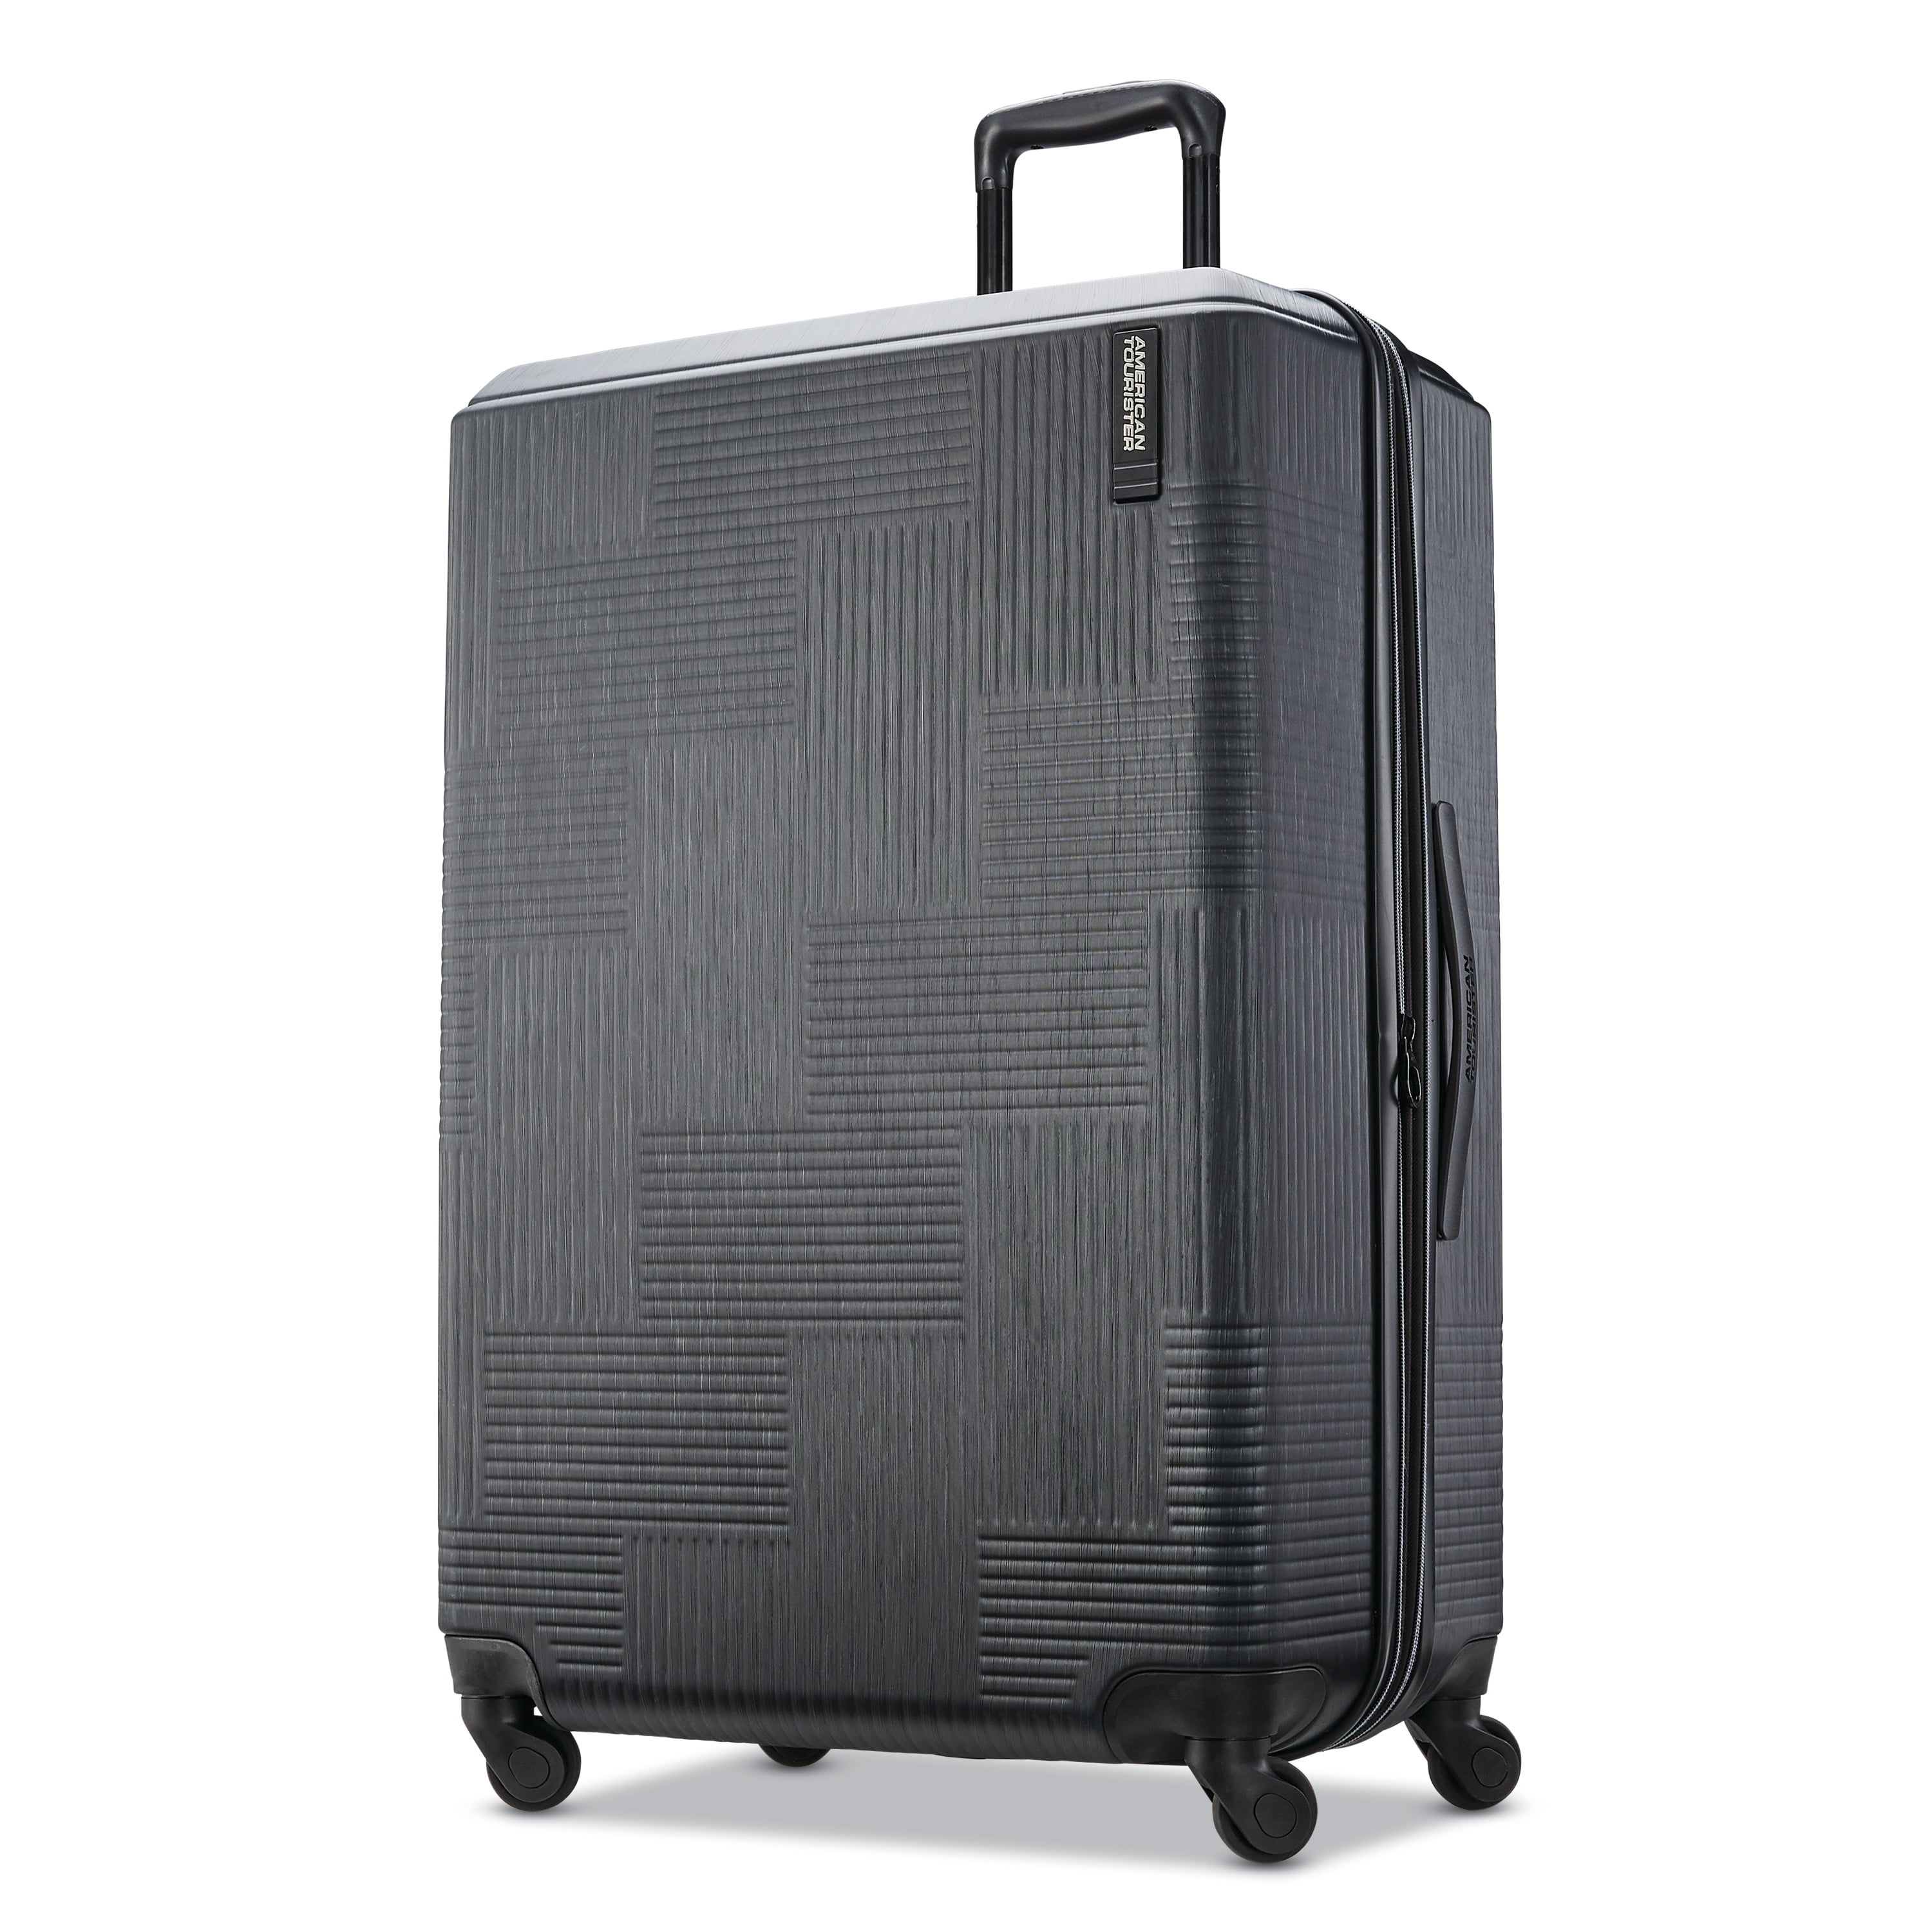 American Tourister Stratum XLT Expandable Hardside Luggage with Spinner Wheels 